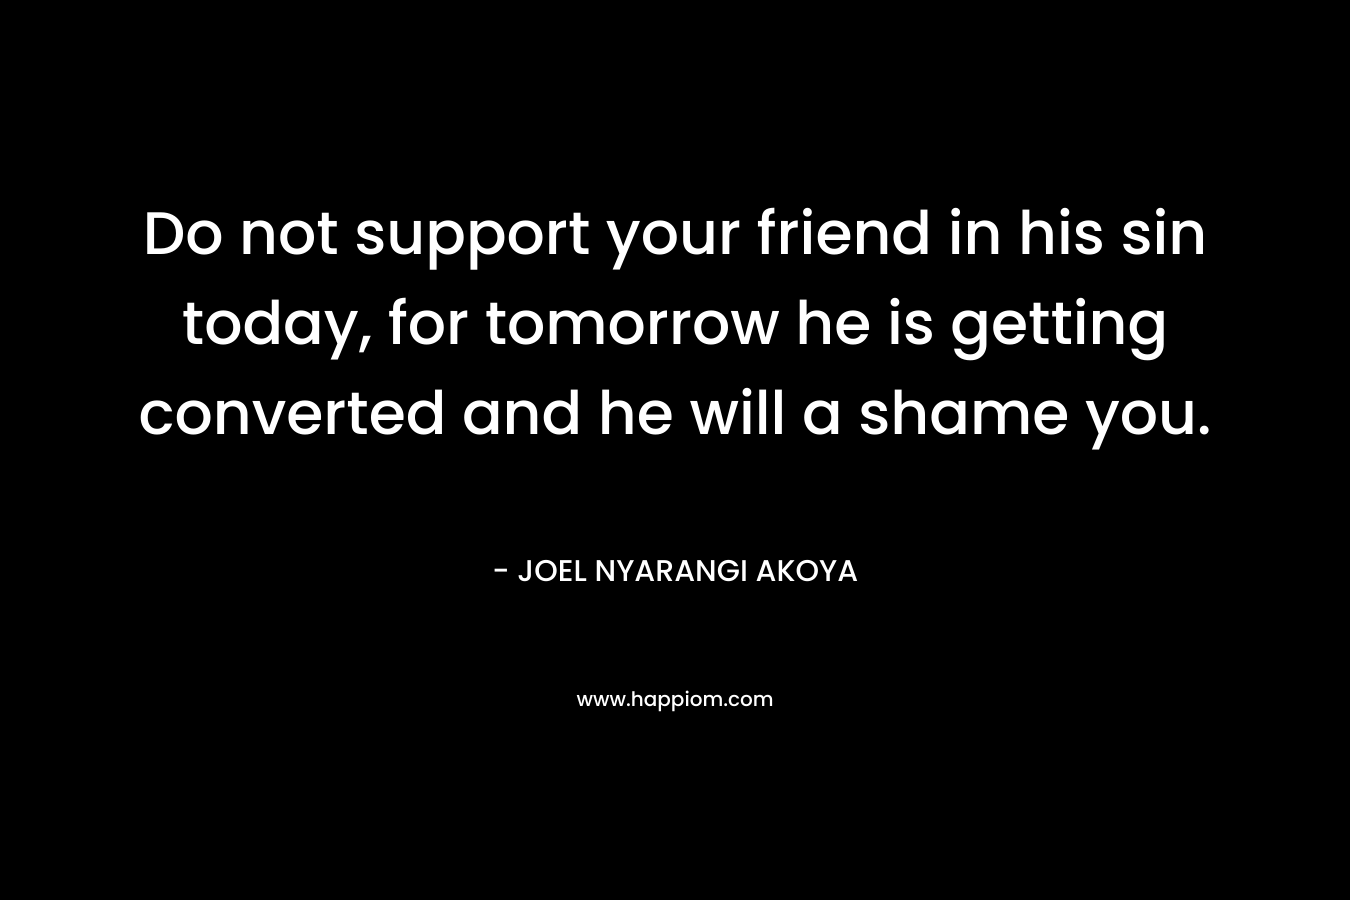 Do not support your friend in his sin today, for tomorrow he is getting converted and he will a shame you. – JOEL NYARANGI AKOYA